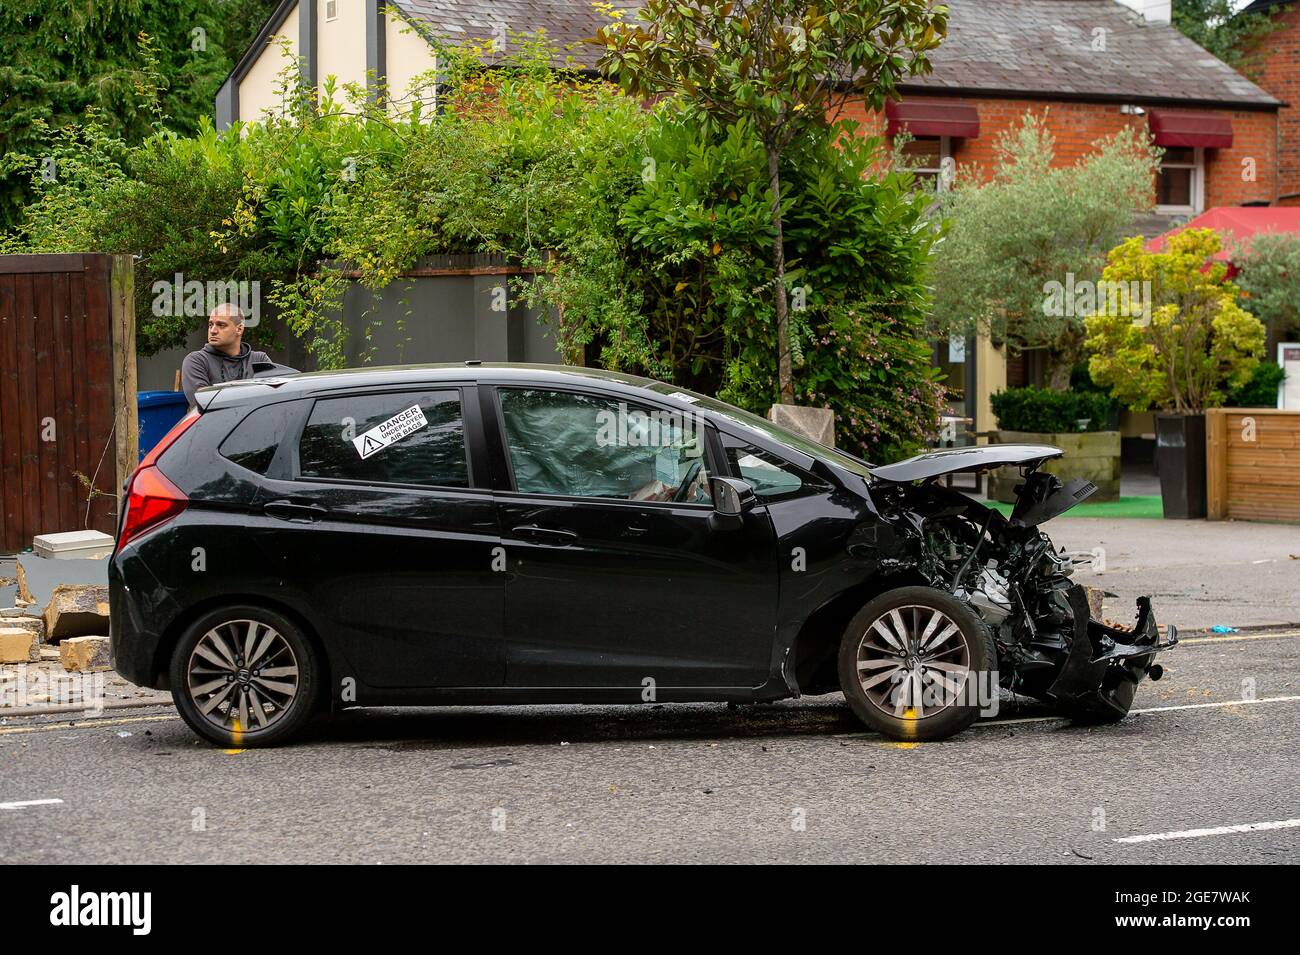 Sunninghill, Berkshire, UK. 17th August, 2021. Part of the A329 was closed this afternoon following a road traffic accident. The RTA occurred near the notorious dangerous T junction on the B383 at Buckhurst Road and the A329. Two cars were badly damaged and the wall of a residential property on the A329 was knocked down. An ambulance was in attendance at the scene of the accident. Credit: Maureen McLean/Alamy Live News Stock Photo